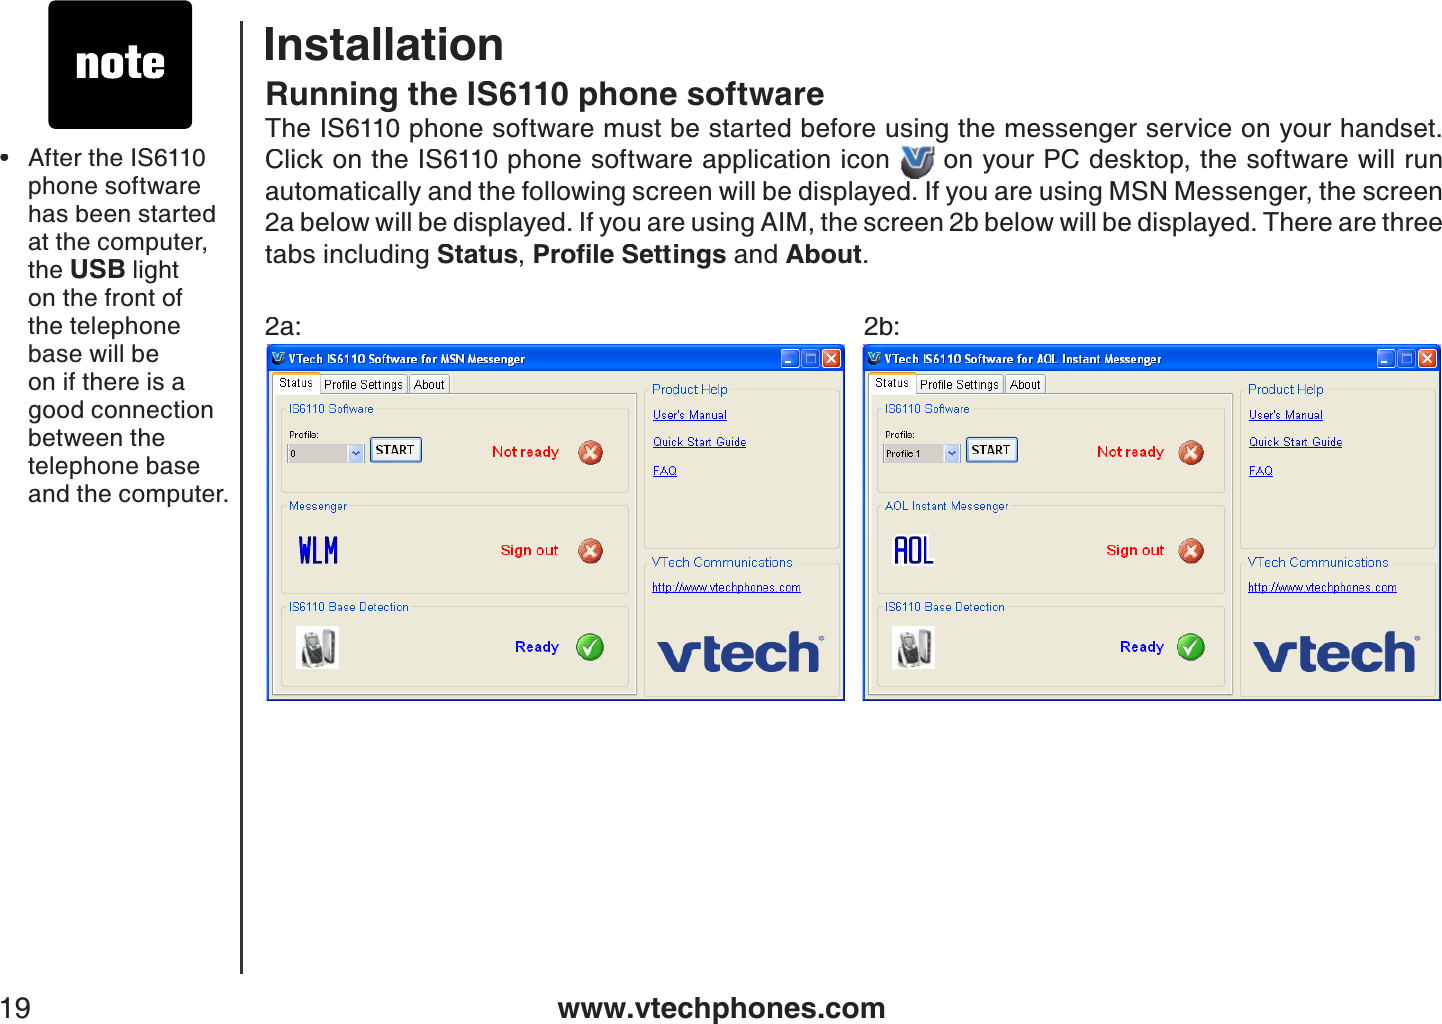 www.vtechphones.com19Running the IS6110 phone softwareThe IS6110 phone software must be started before using the messenger service on your handset. Click on the IS6110 phone software application icon  on your PC desktop, the software will run automatically and the following screen will be displayed. If you are using MSN Messenger, the screen 2a below will be displayed. If you are using AIM, the screen 2b below will be displayed. There are three tabs including Status,2TQſNG5GVVKPIU and About.2a:      2b:After the IS6110 phone software has been started at the computer, the USB light on the front of the telephone base will be on if there is a good connection between the telephone base and the computer.•Installation